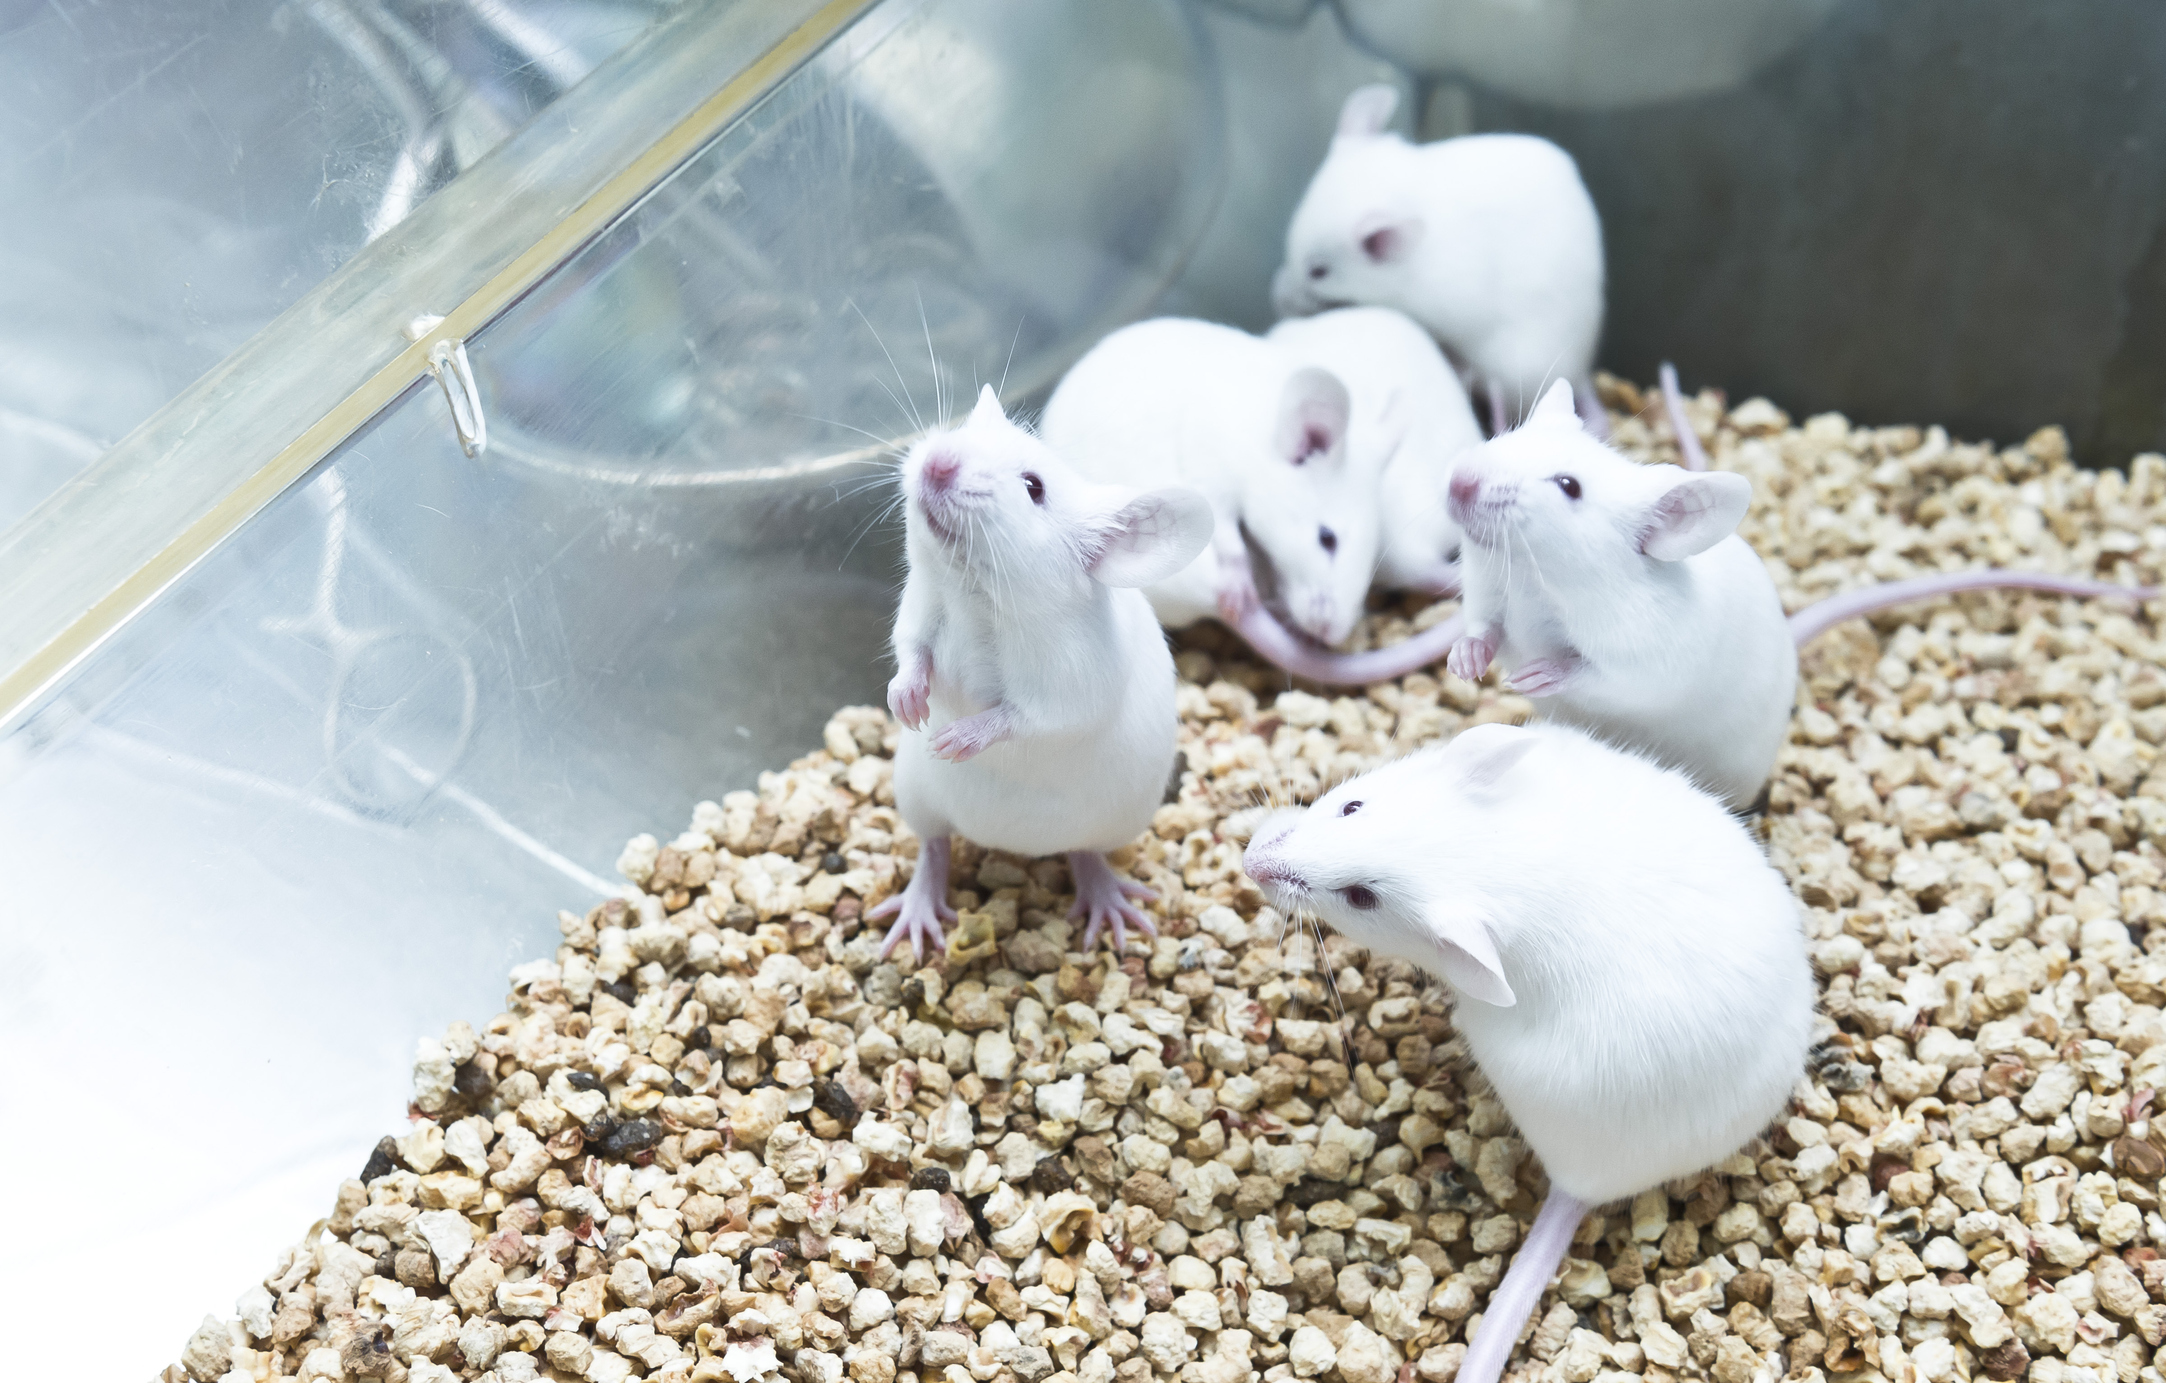 Scientists Used Genetic Engineering to Change How High Cocaine Got Mice In Study